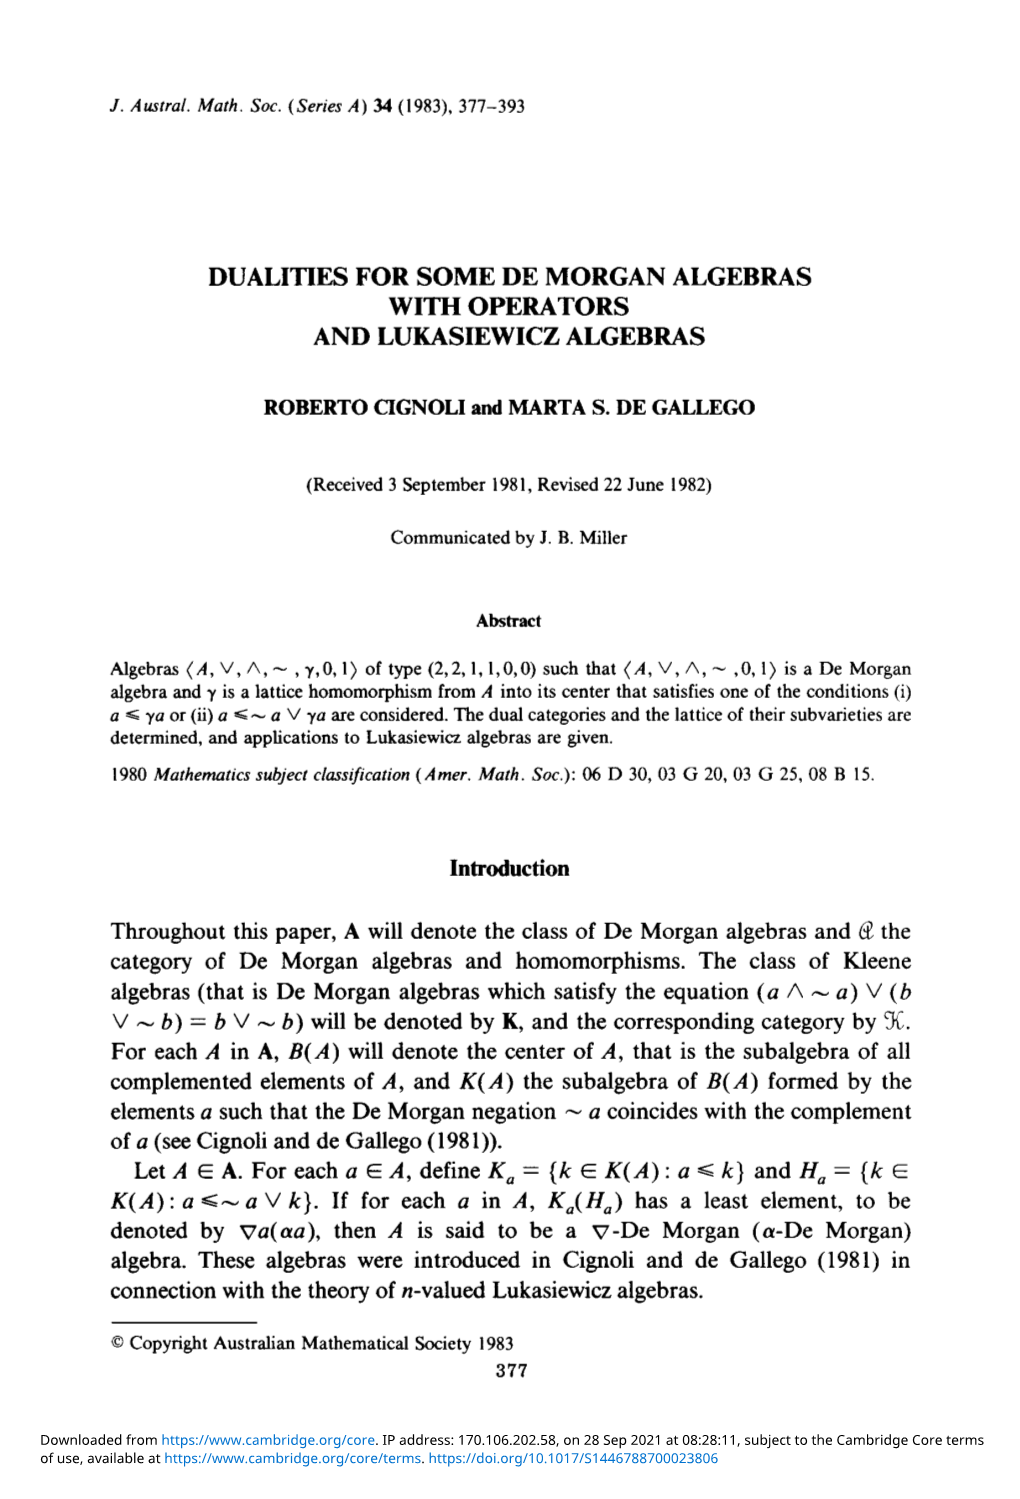 Dualities for Some De Morgan Algebras with Operators and Lukasiewicz Algebras